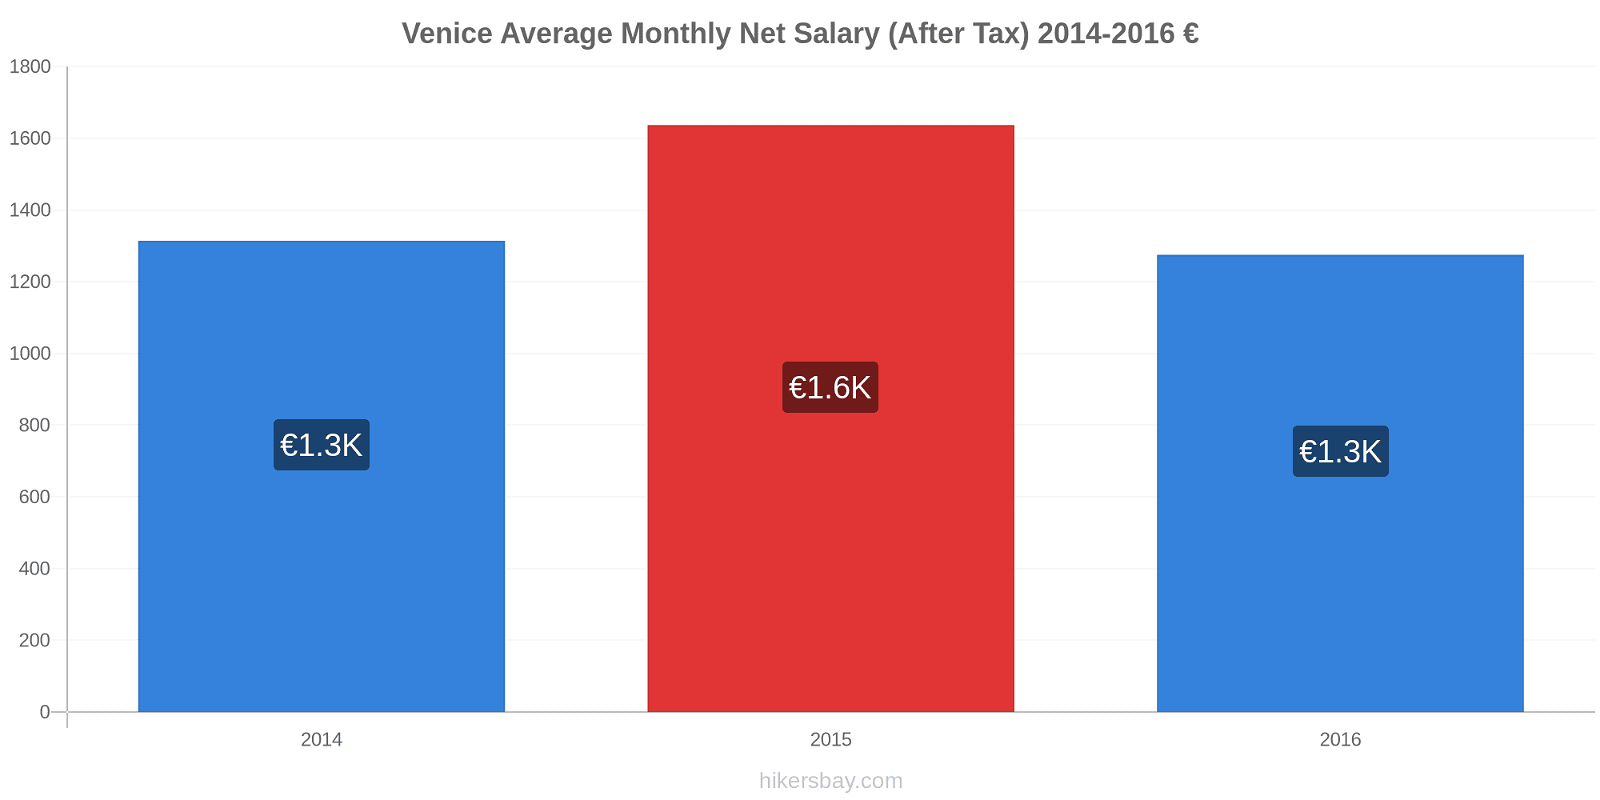 Venice price changes Average Monthly Net Salary (After Tax) hikersbay.com